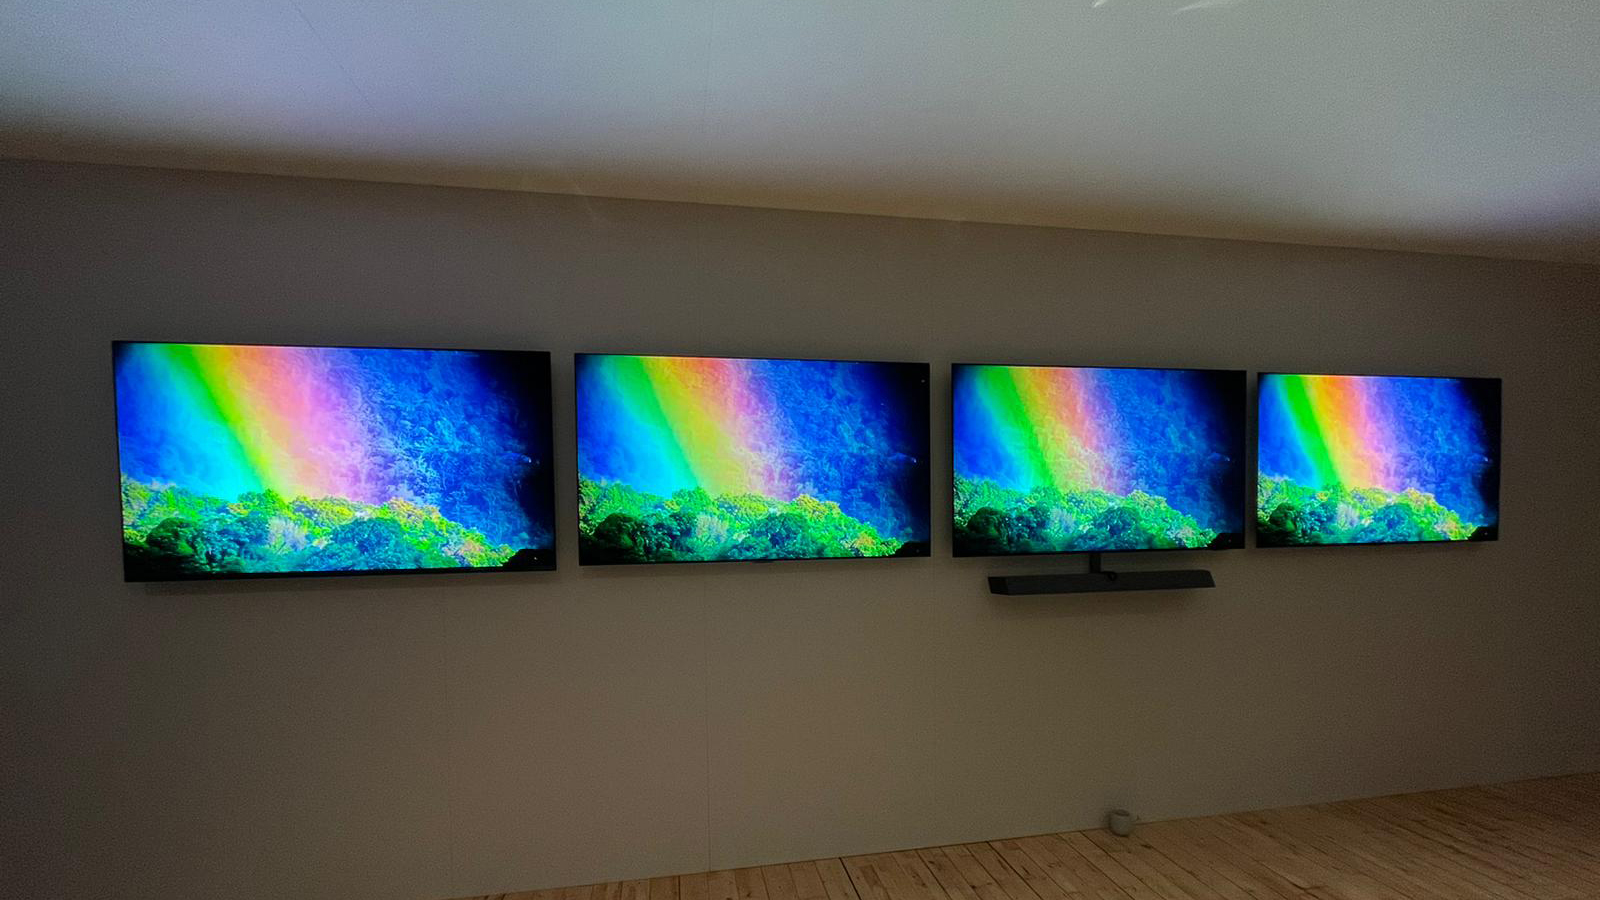 Philips OLED TV with three other OLED TVs on a wall